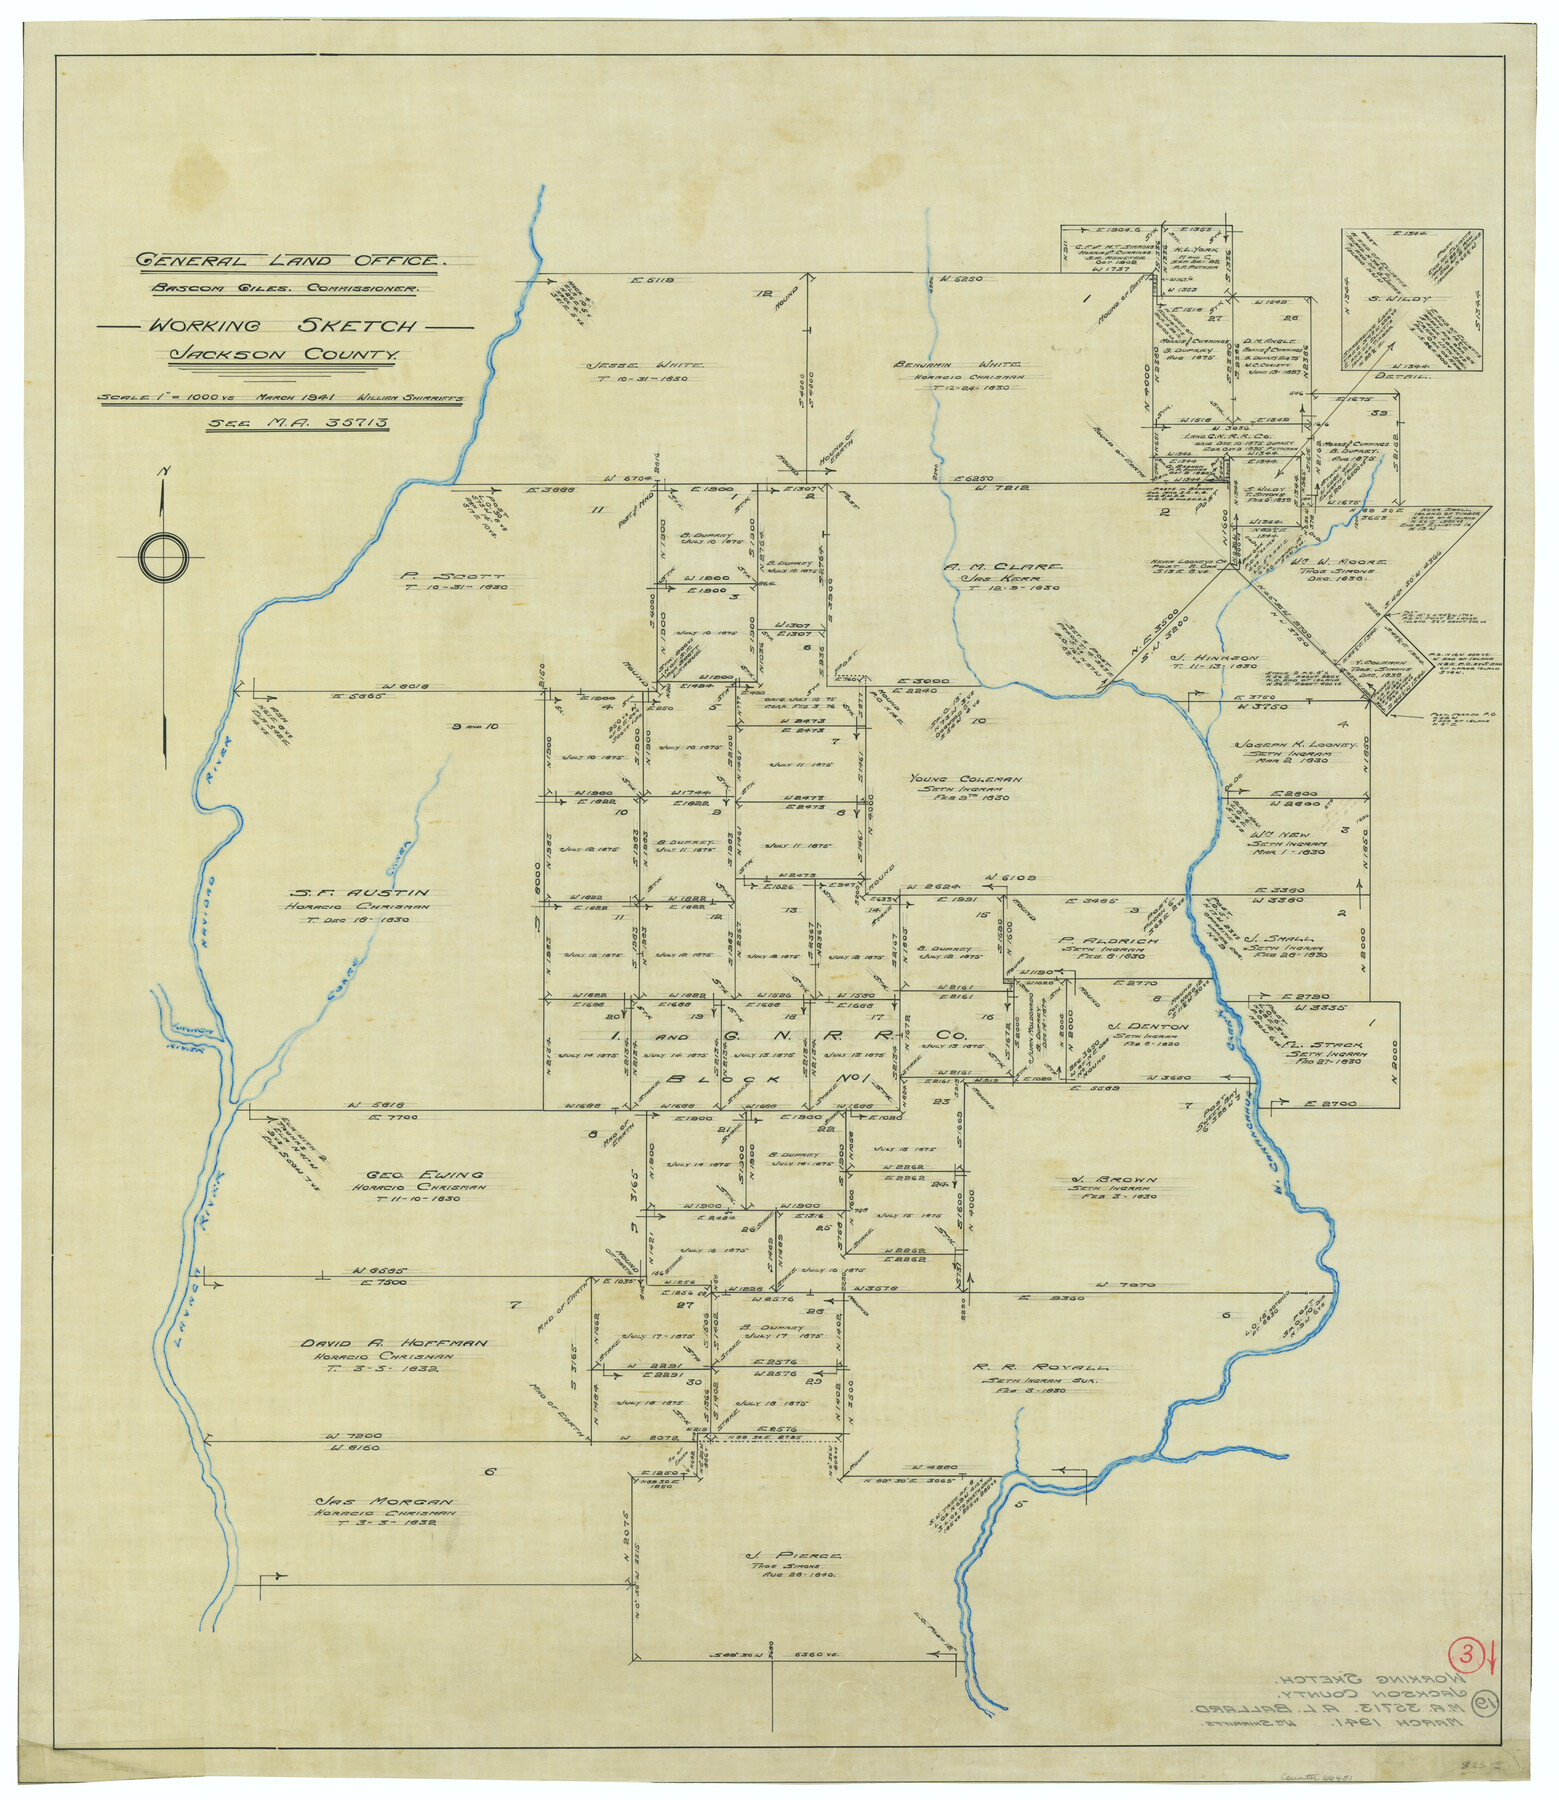 66451, Jackson County Working Sketch 3, General Map Collection